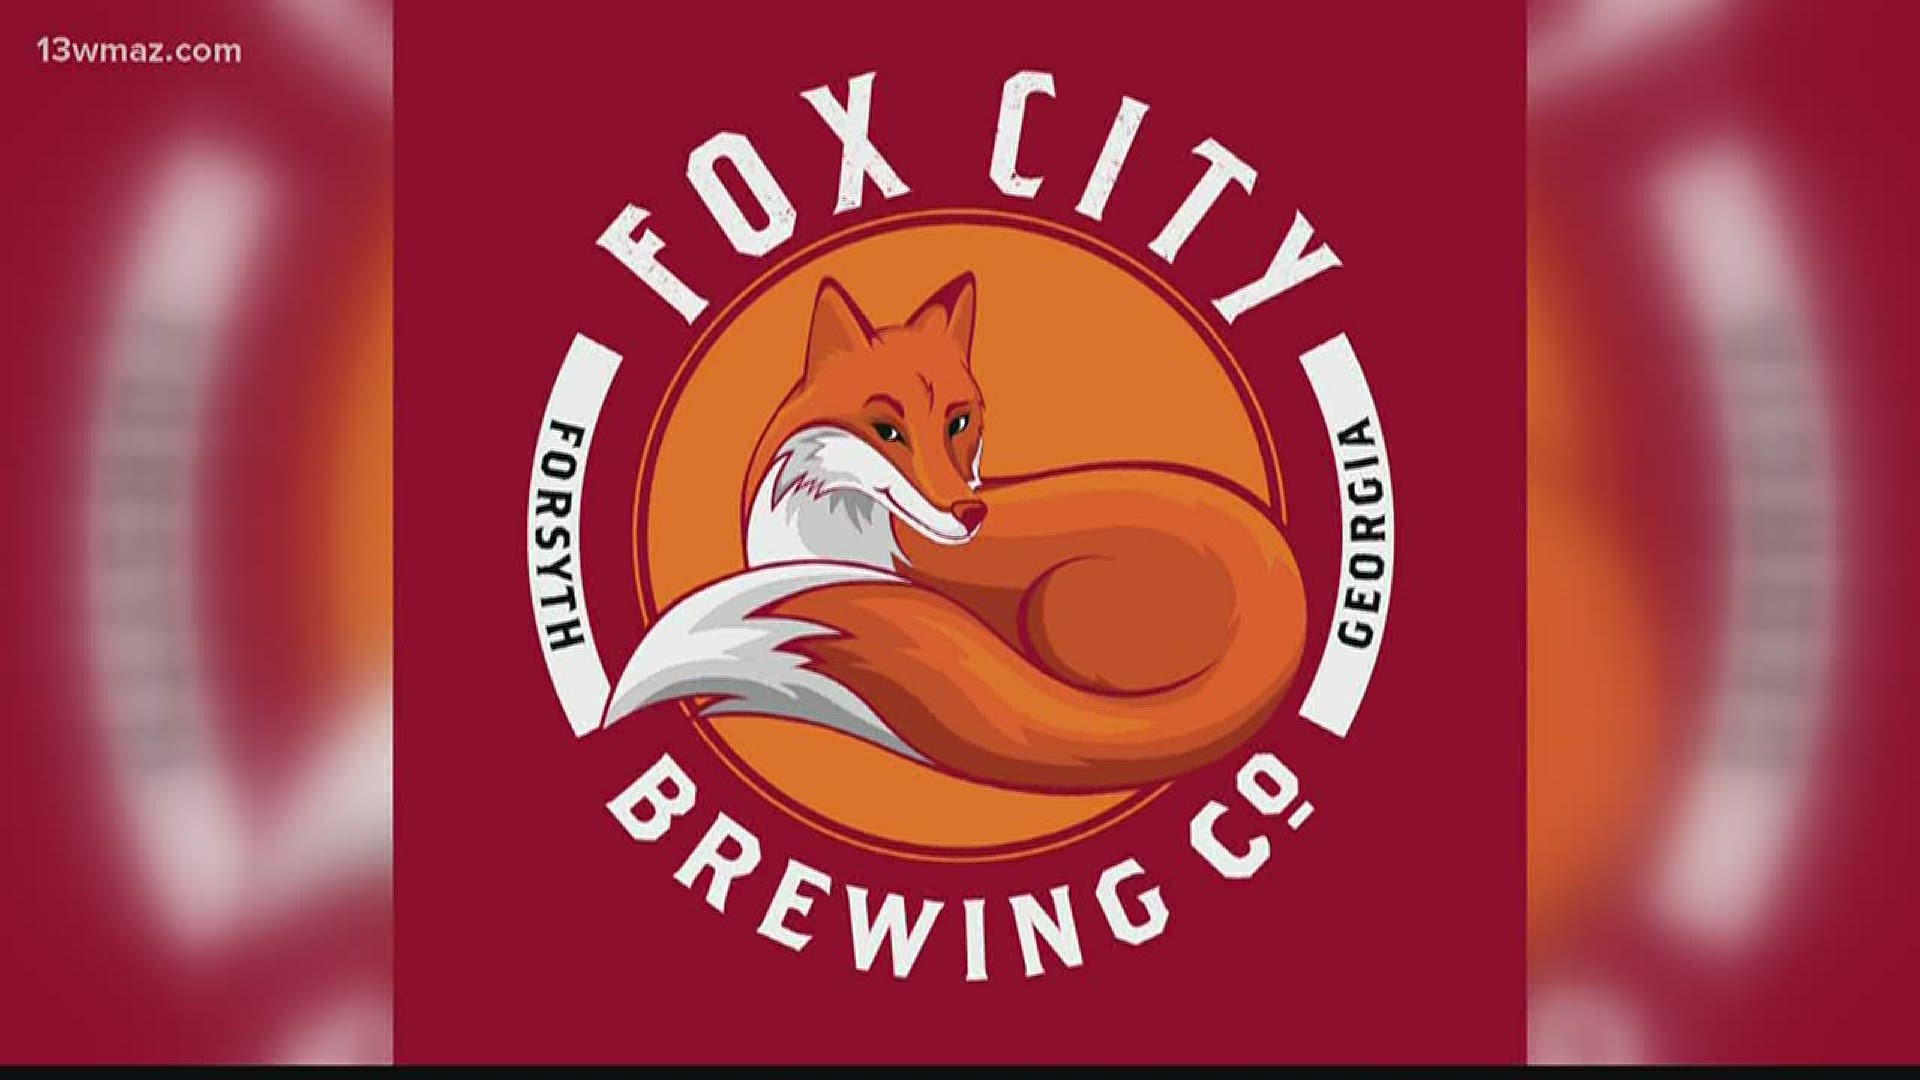 A new brewery is coming to Forsyth. Fox City Brewery will open its doors on July 4th and welcome people into a fun environment with food and fresh-brewed beer.